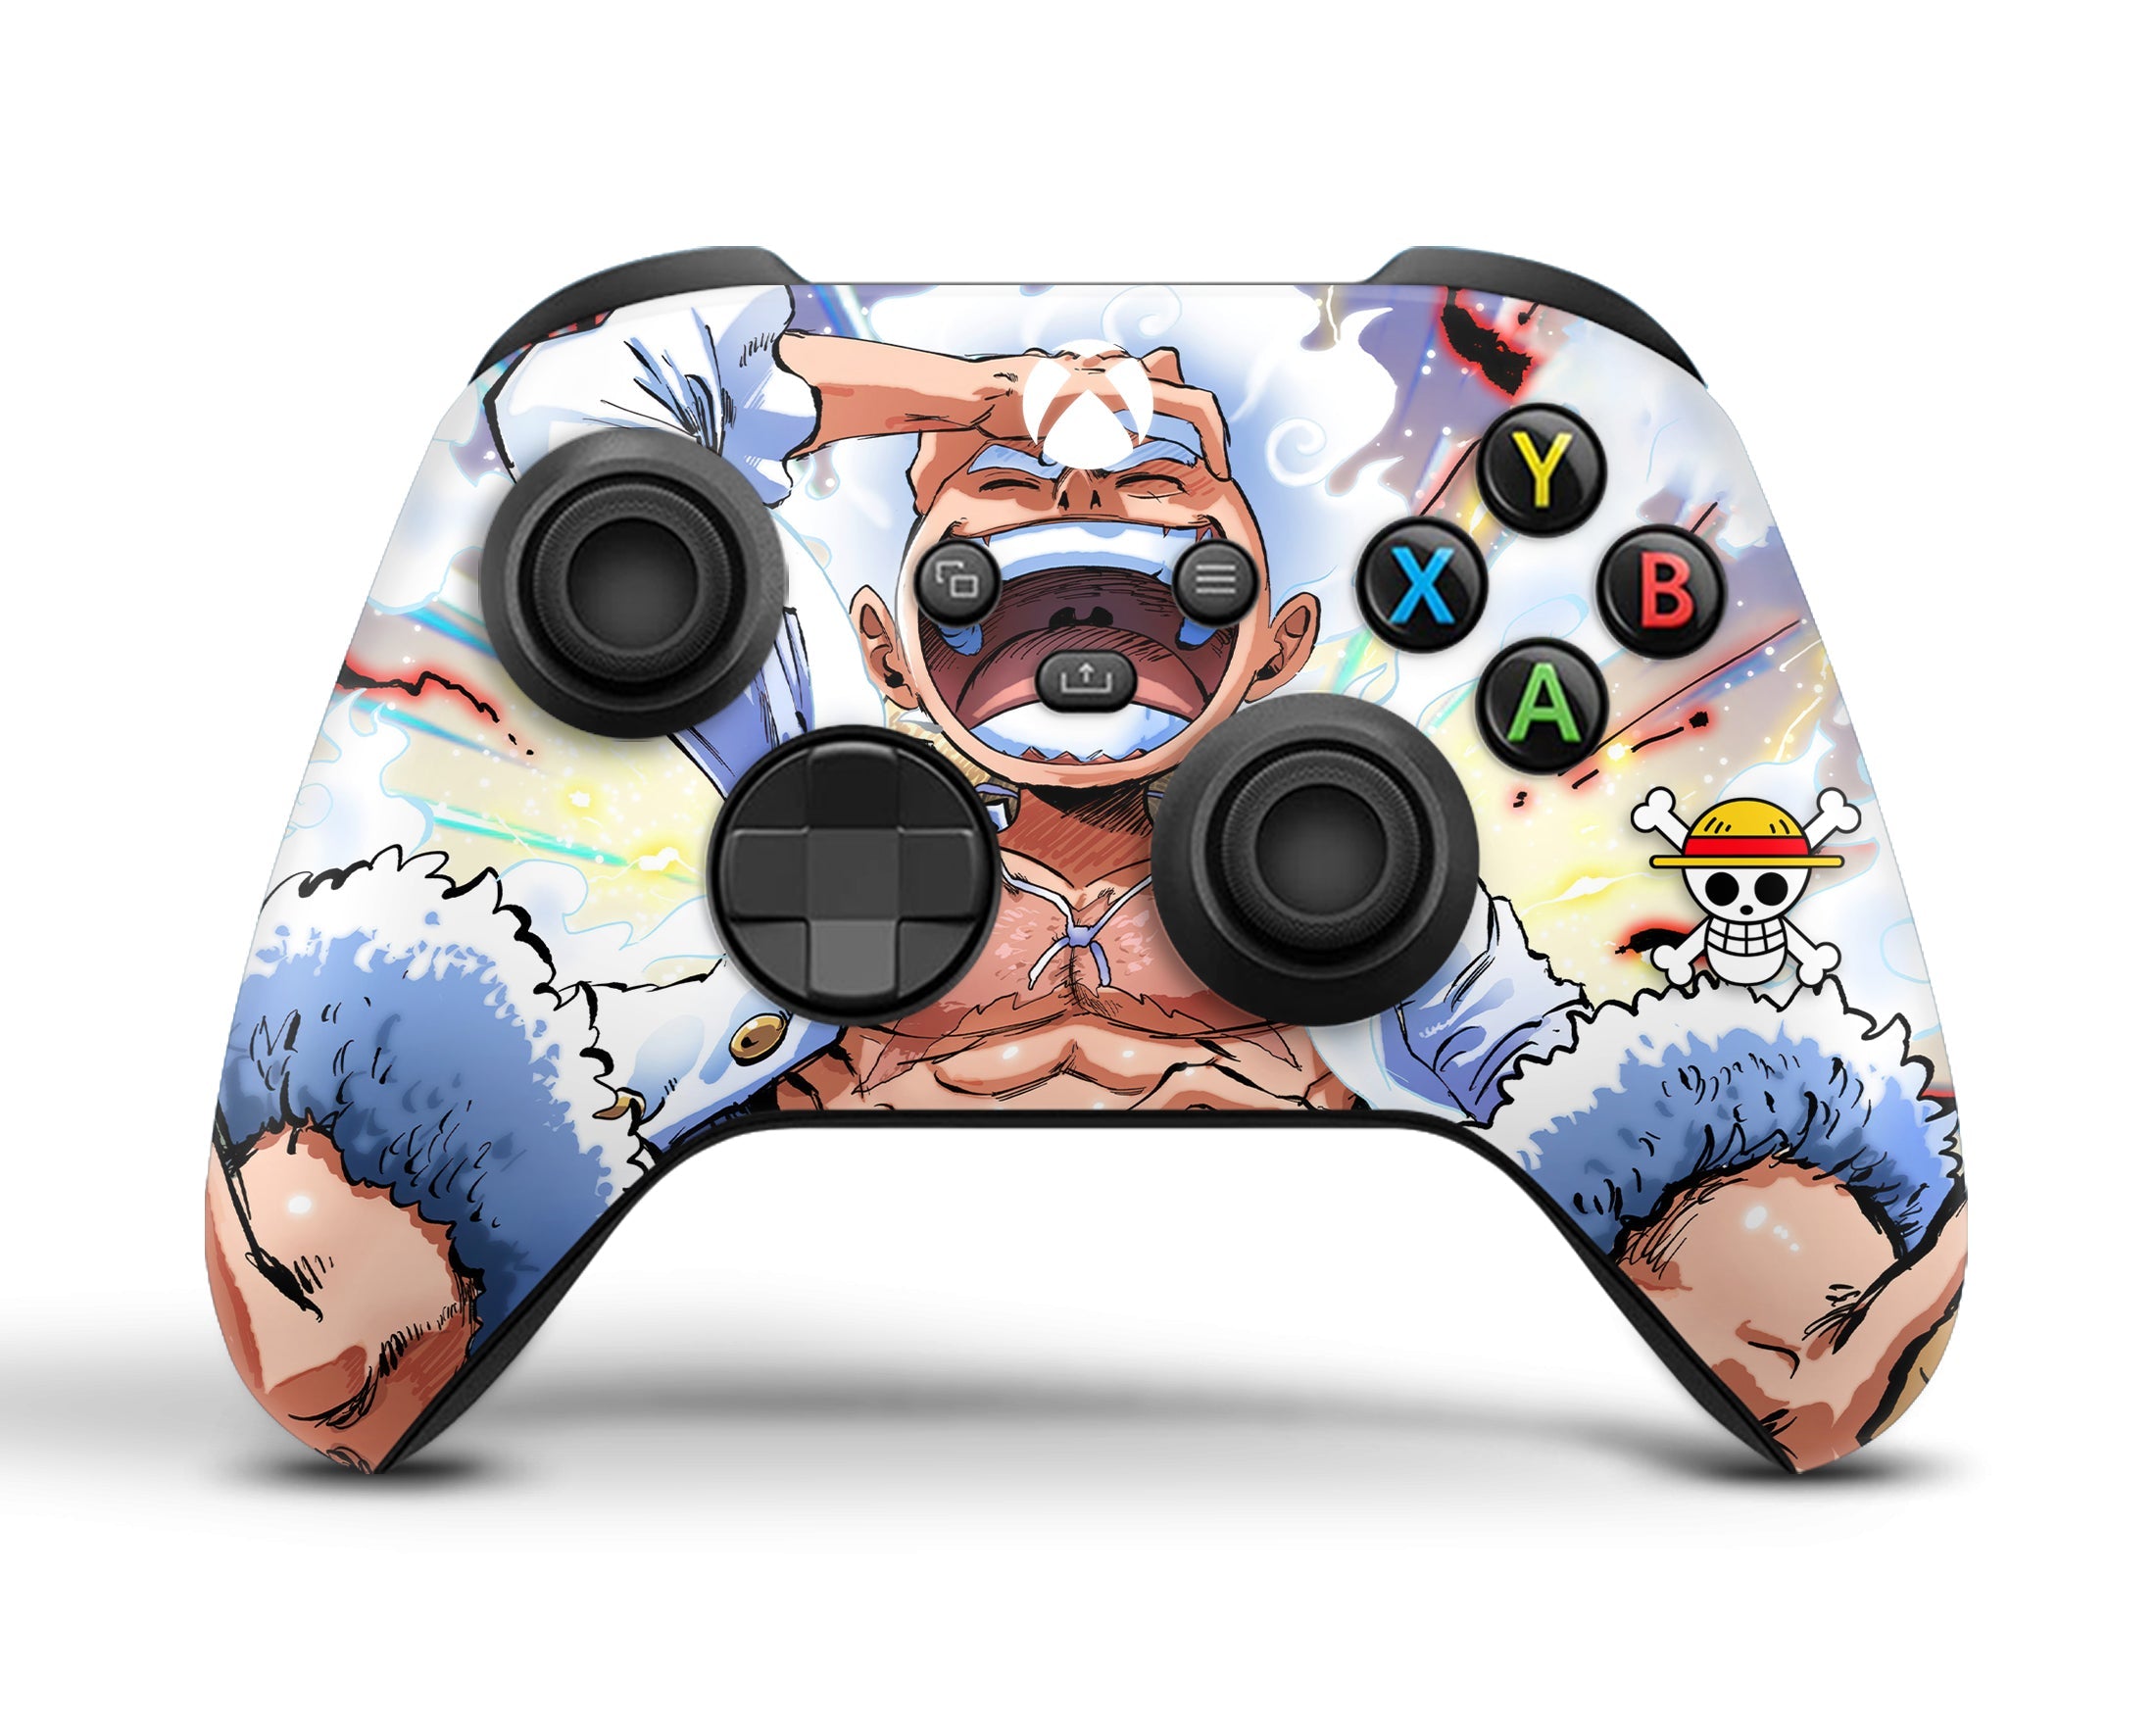 Elite Series 2 Xbox Controller: Manga Inspired Controllers